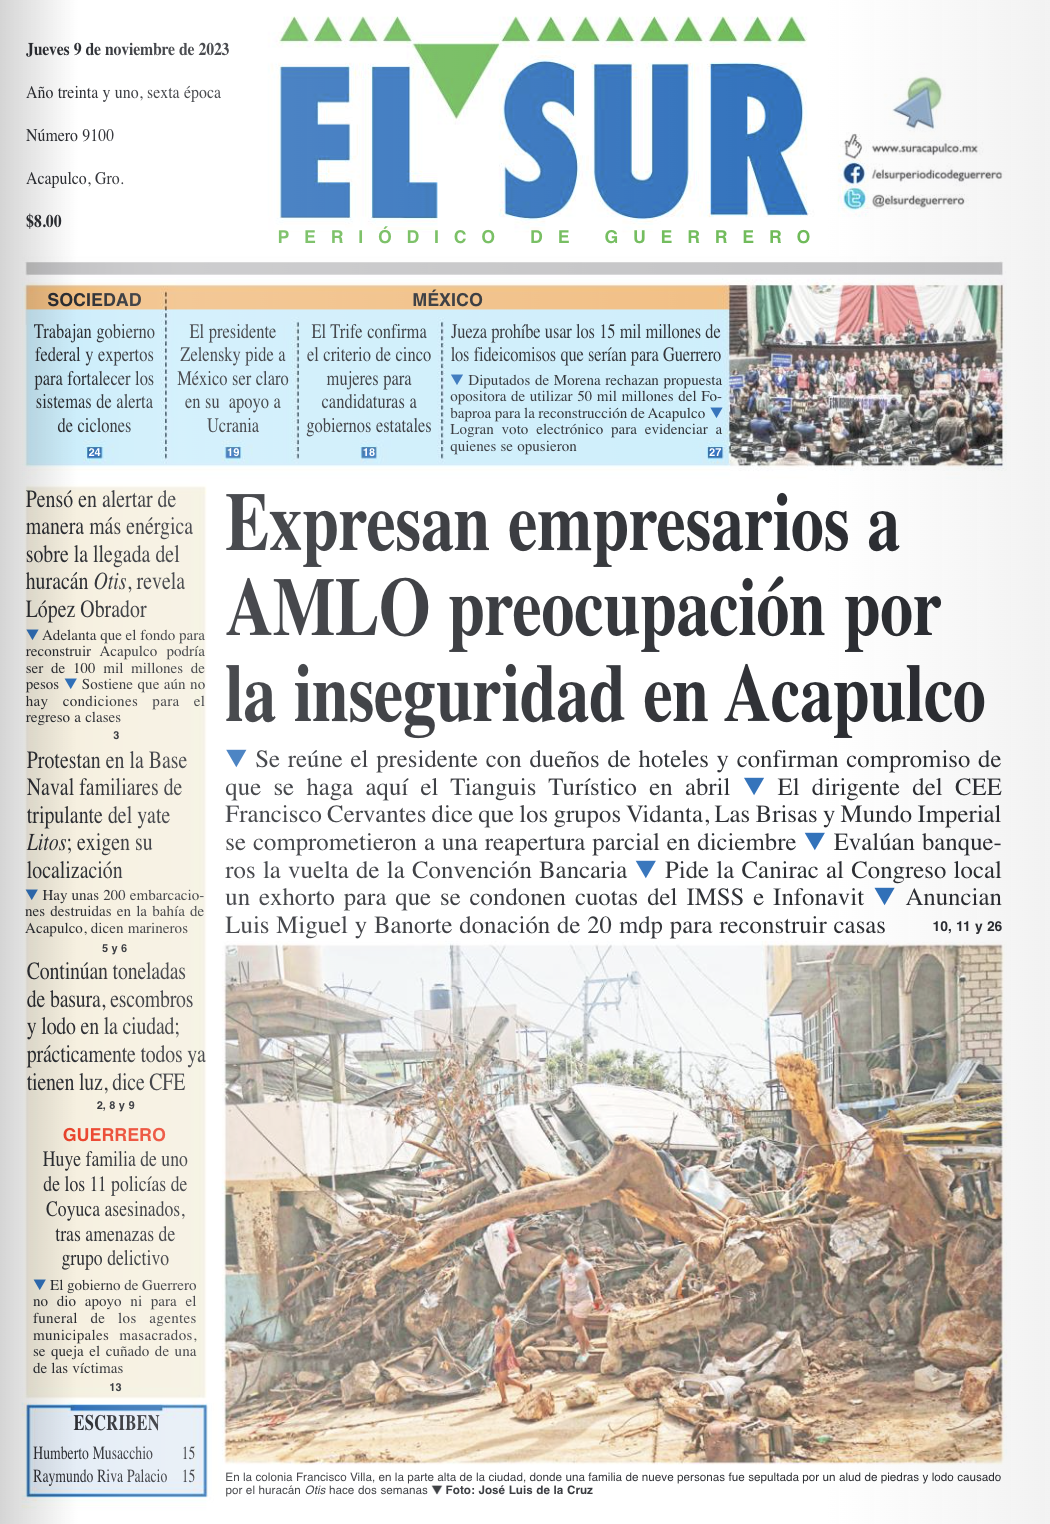 Cover of El Sur newspaper from Acapulco, Mexico.